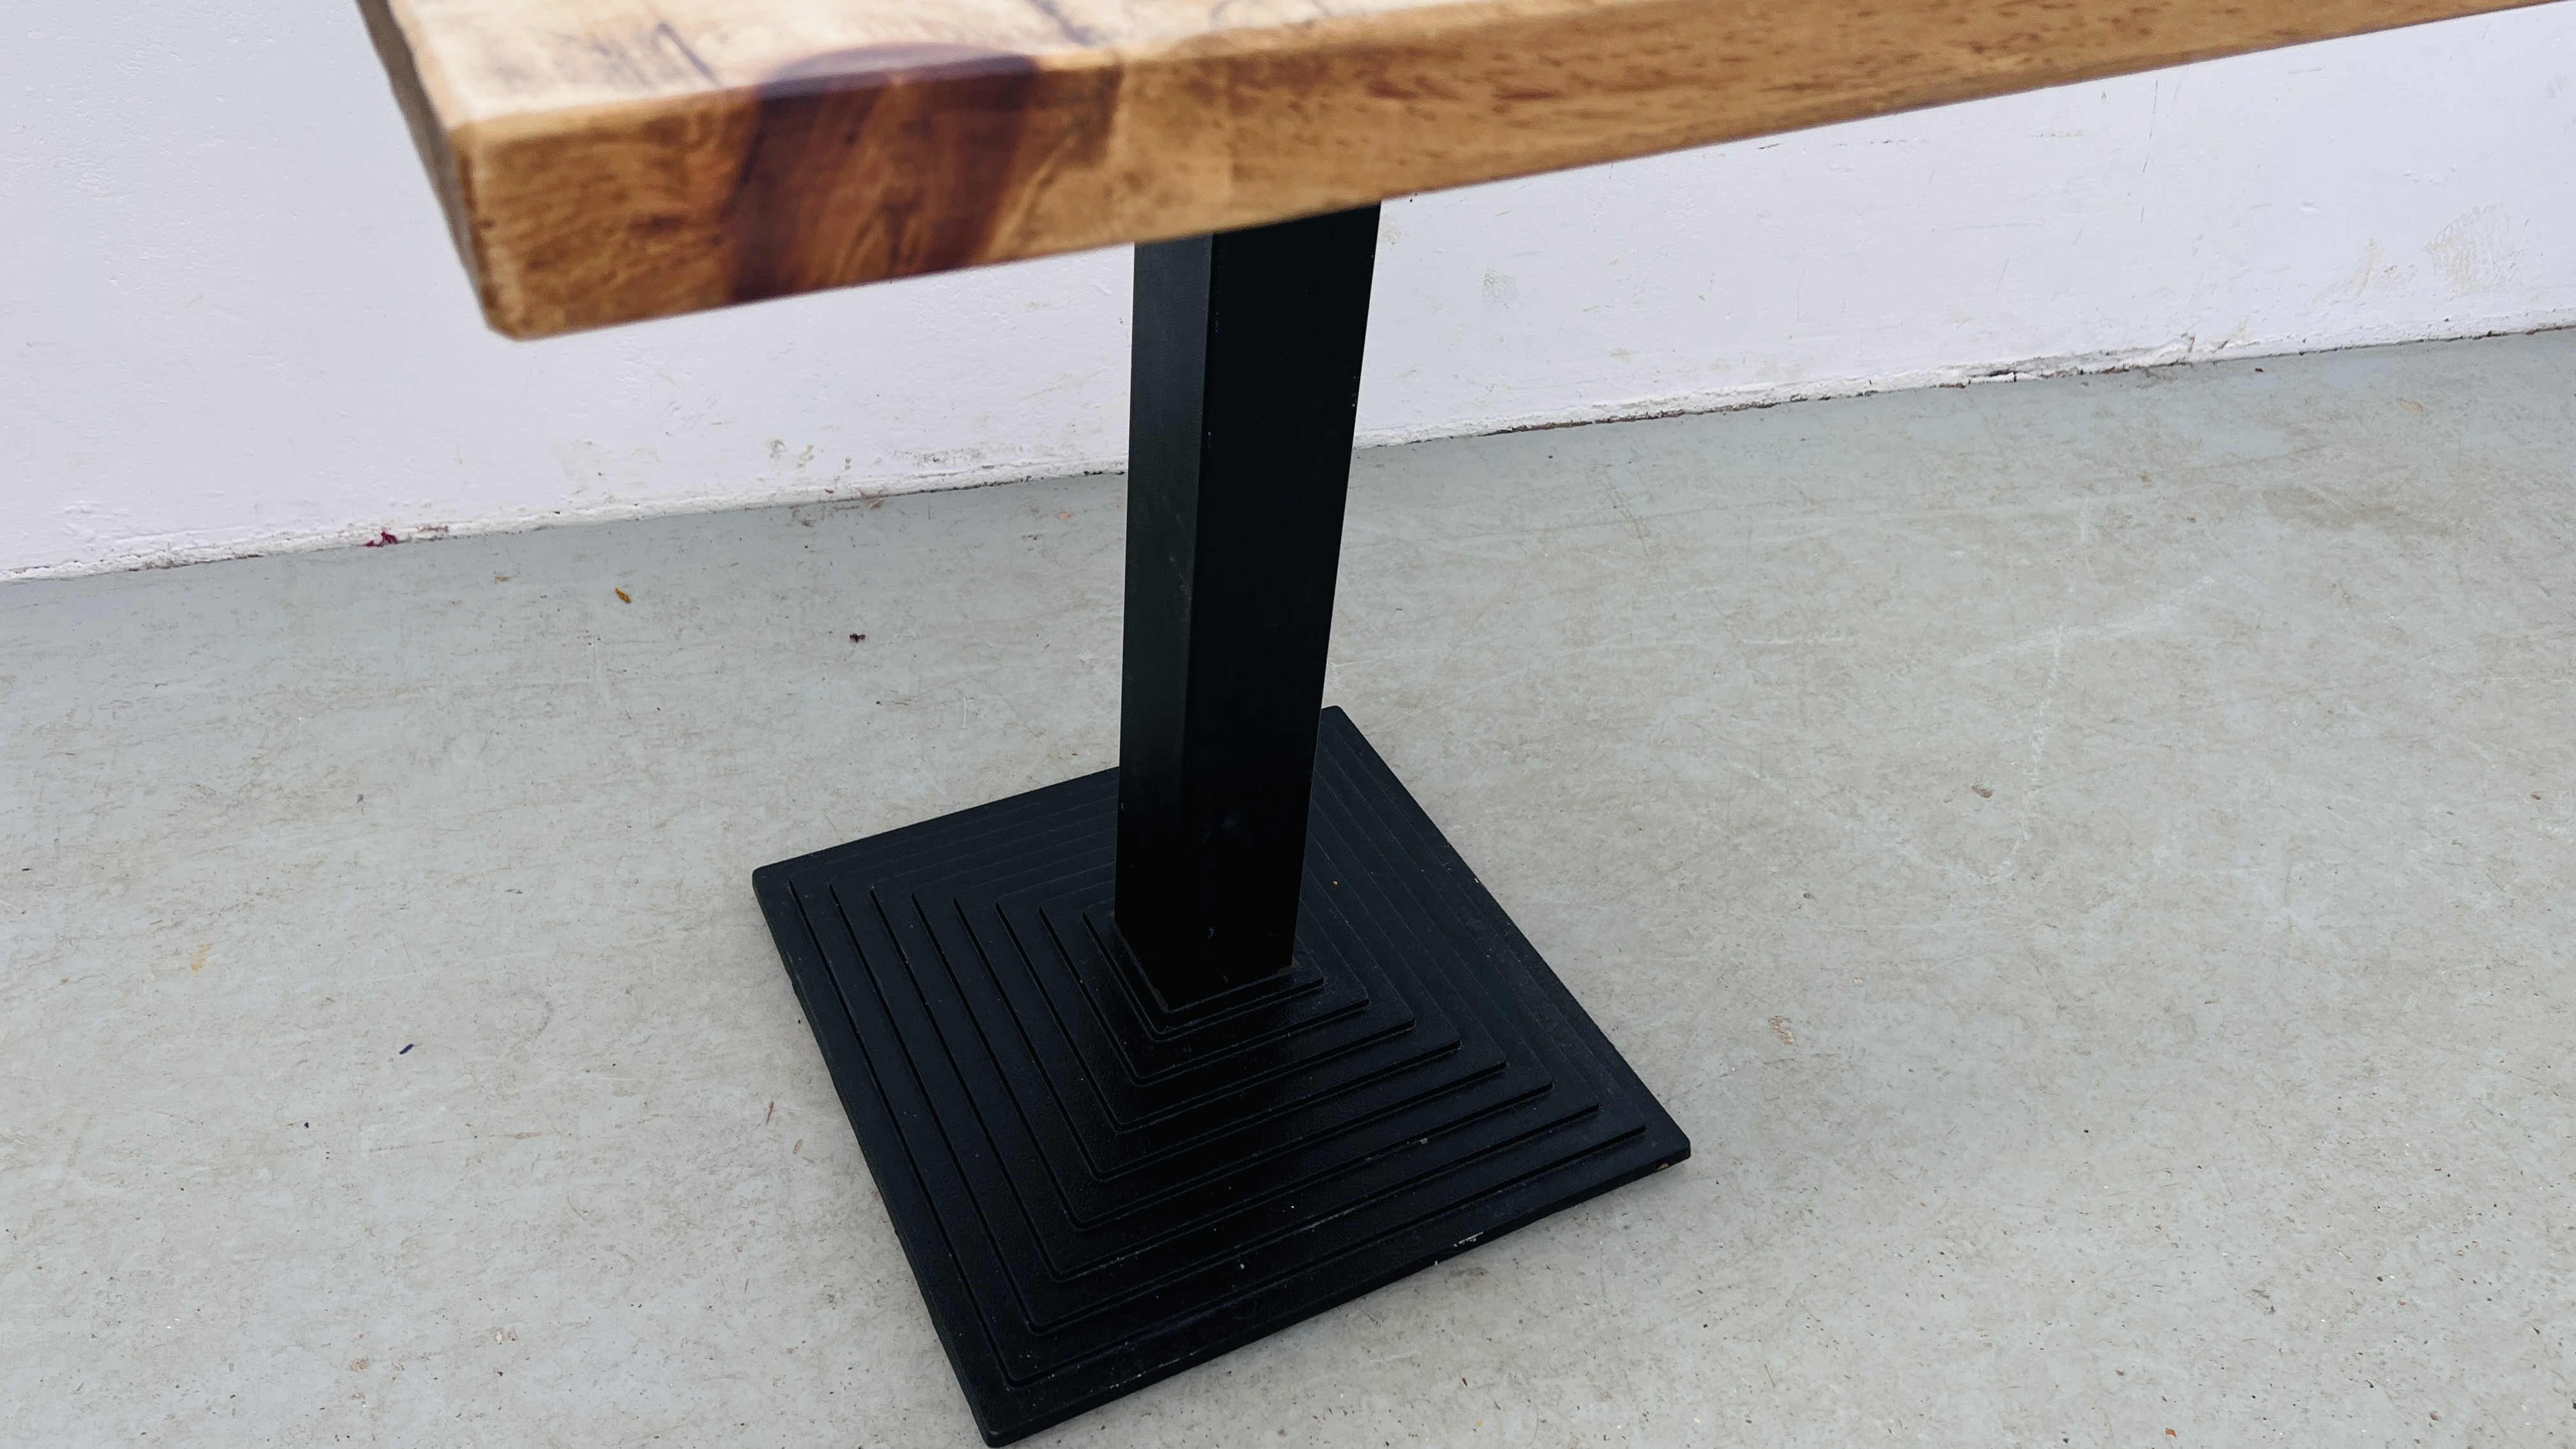 PEDESTAL BISTRO TABLE CAST BASE WITH WAXED PINE TOP - 70CM X 70CM. - Image 5 of 8